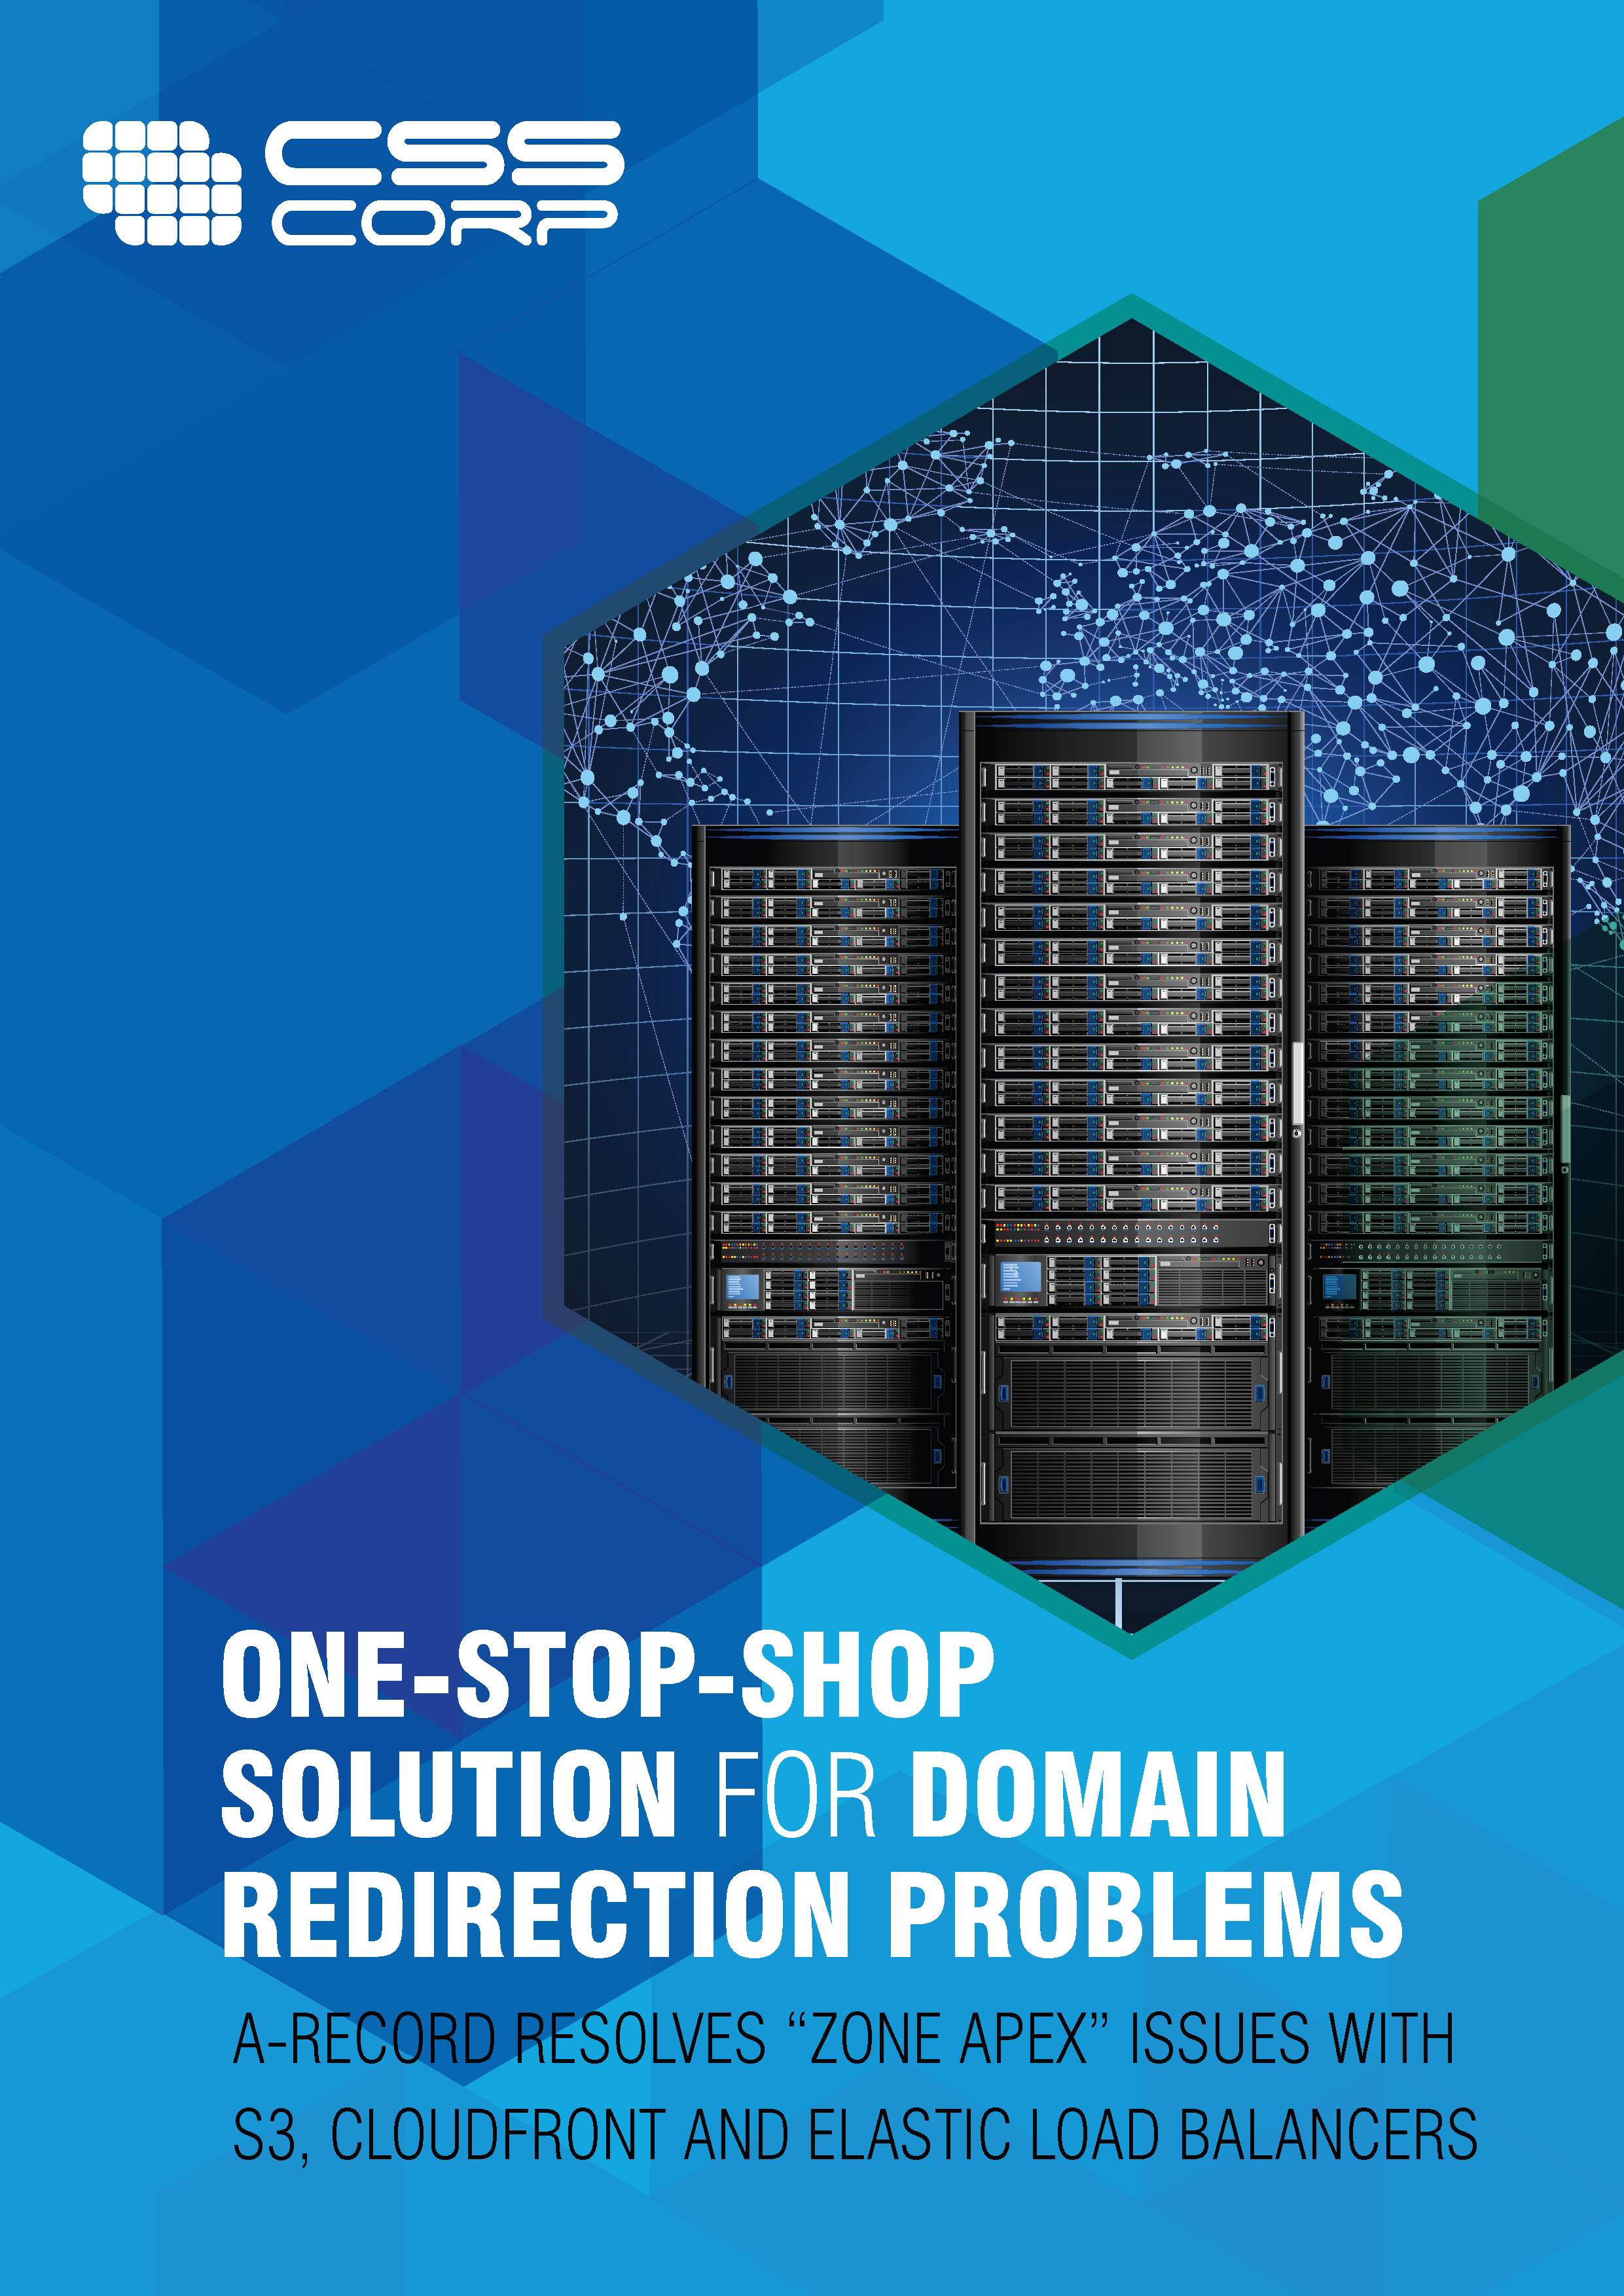 One-stop solution for domain redirection problems